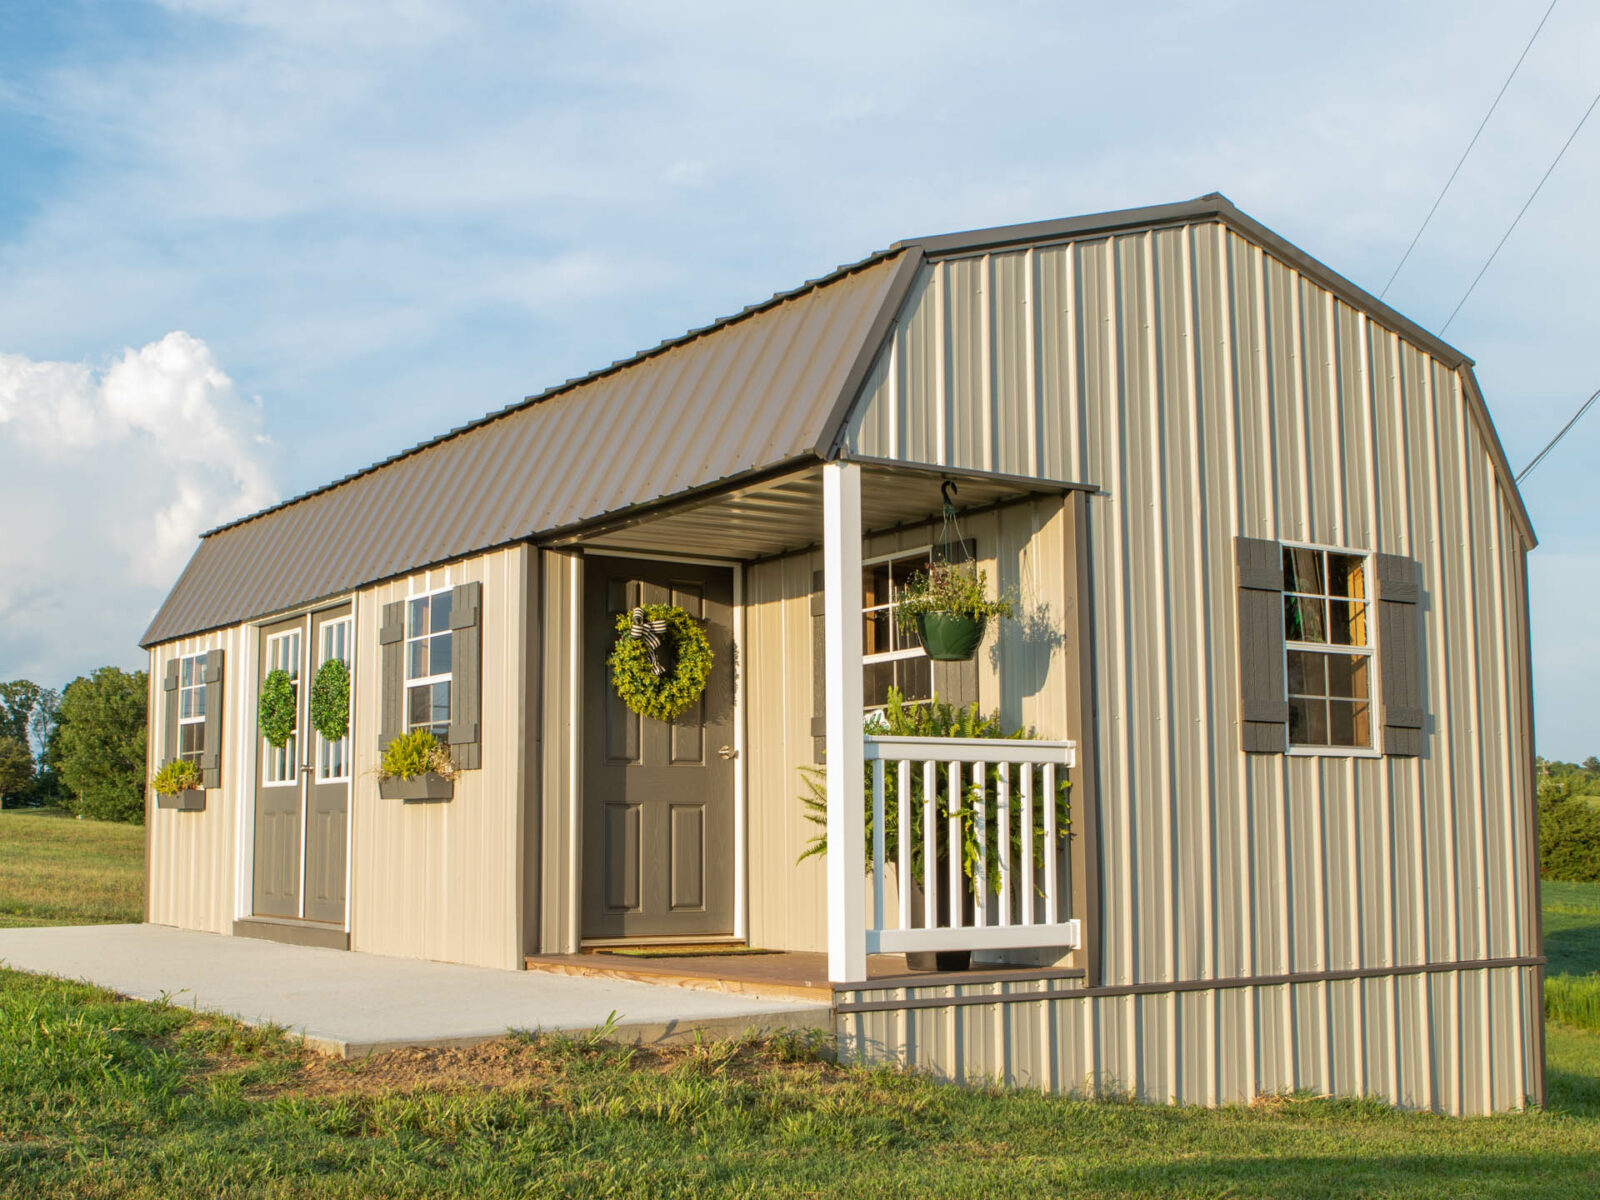 sheds and cabins for sale in nashville tn